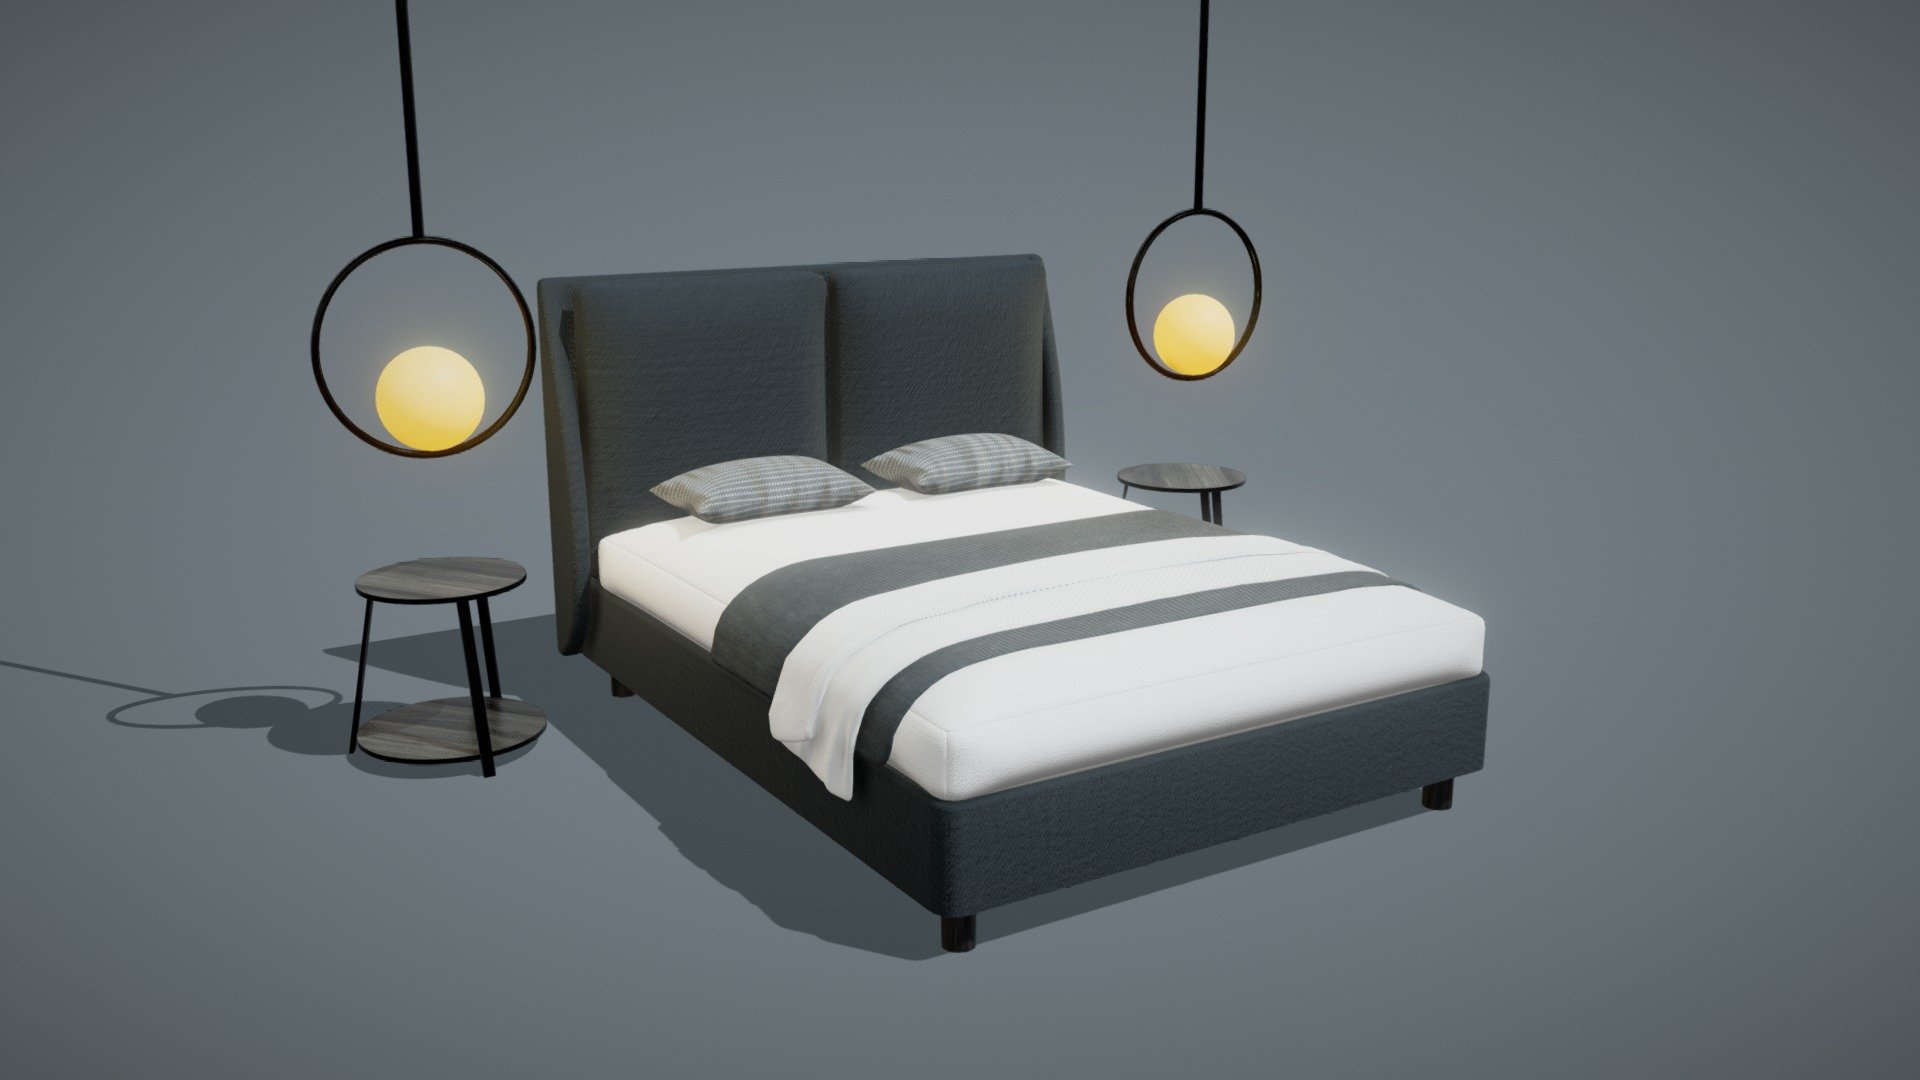 Thats a bed set 04

Model is made for Modern Design Interior

Great for any interior project or AR Project.

model has 4 material set with 4k textures 3d model